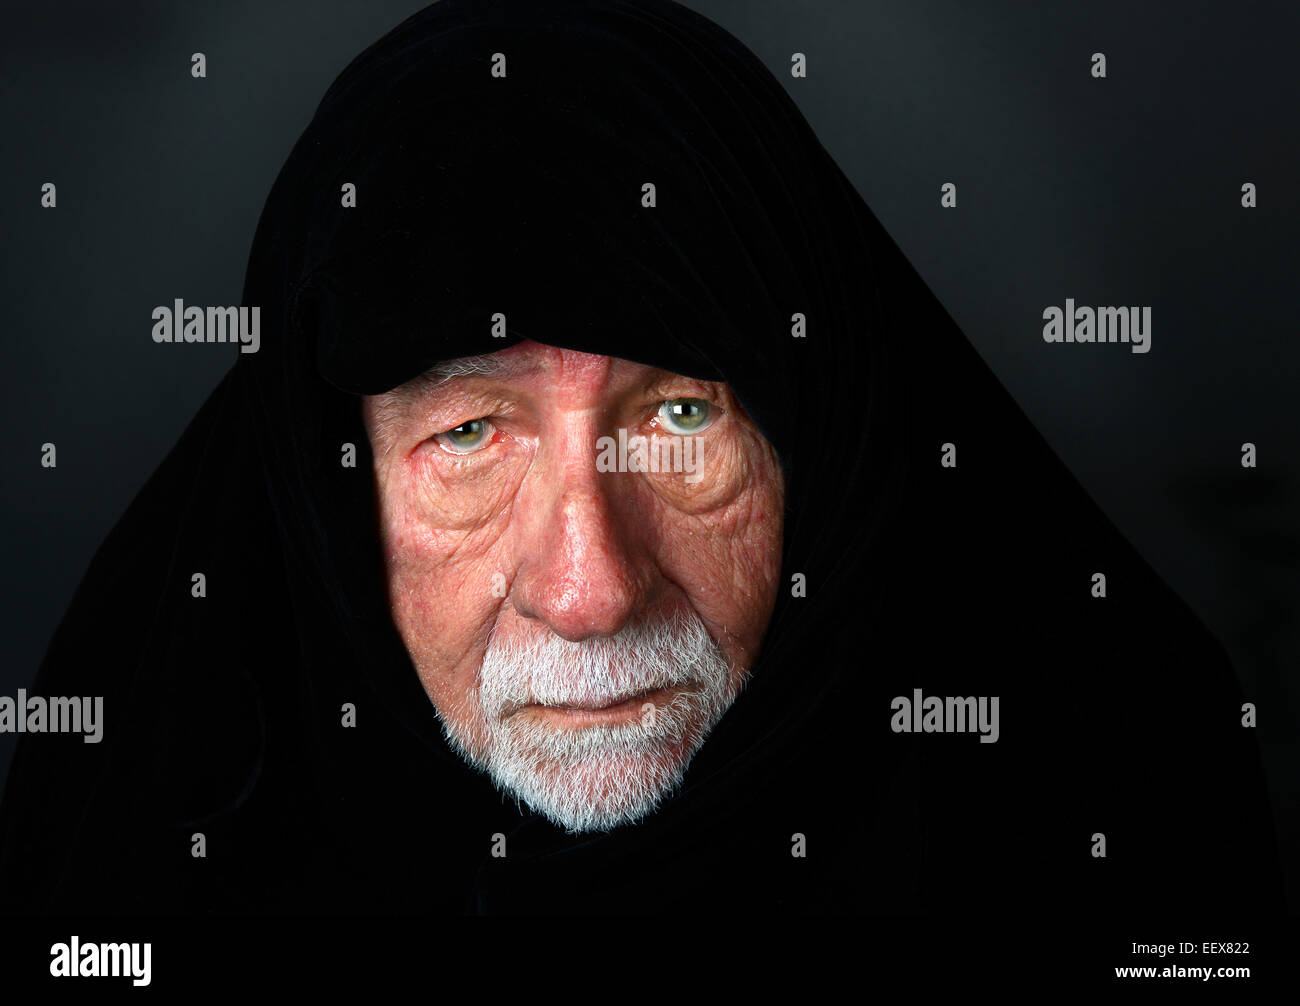 Elder Arab Sheik with a somber expression with a black headdress looking directly into the camera Stock Photo